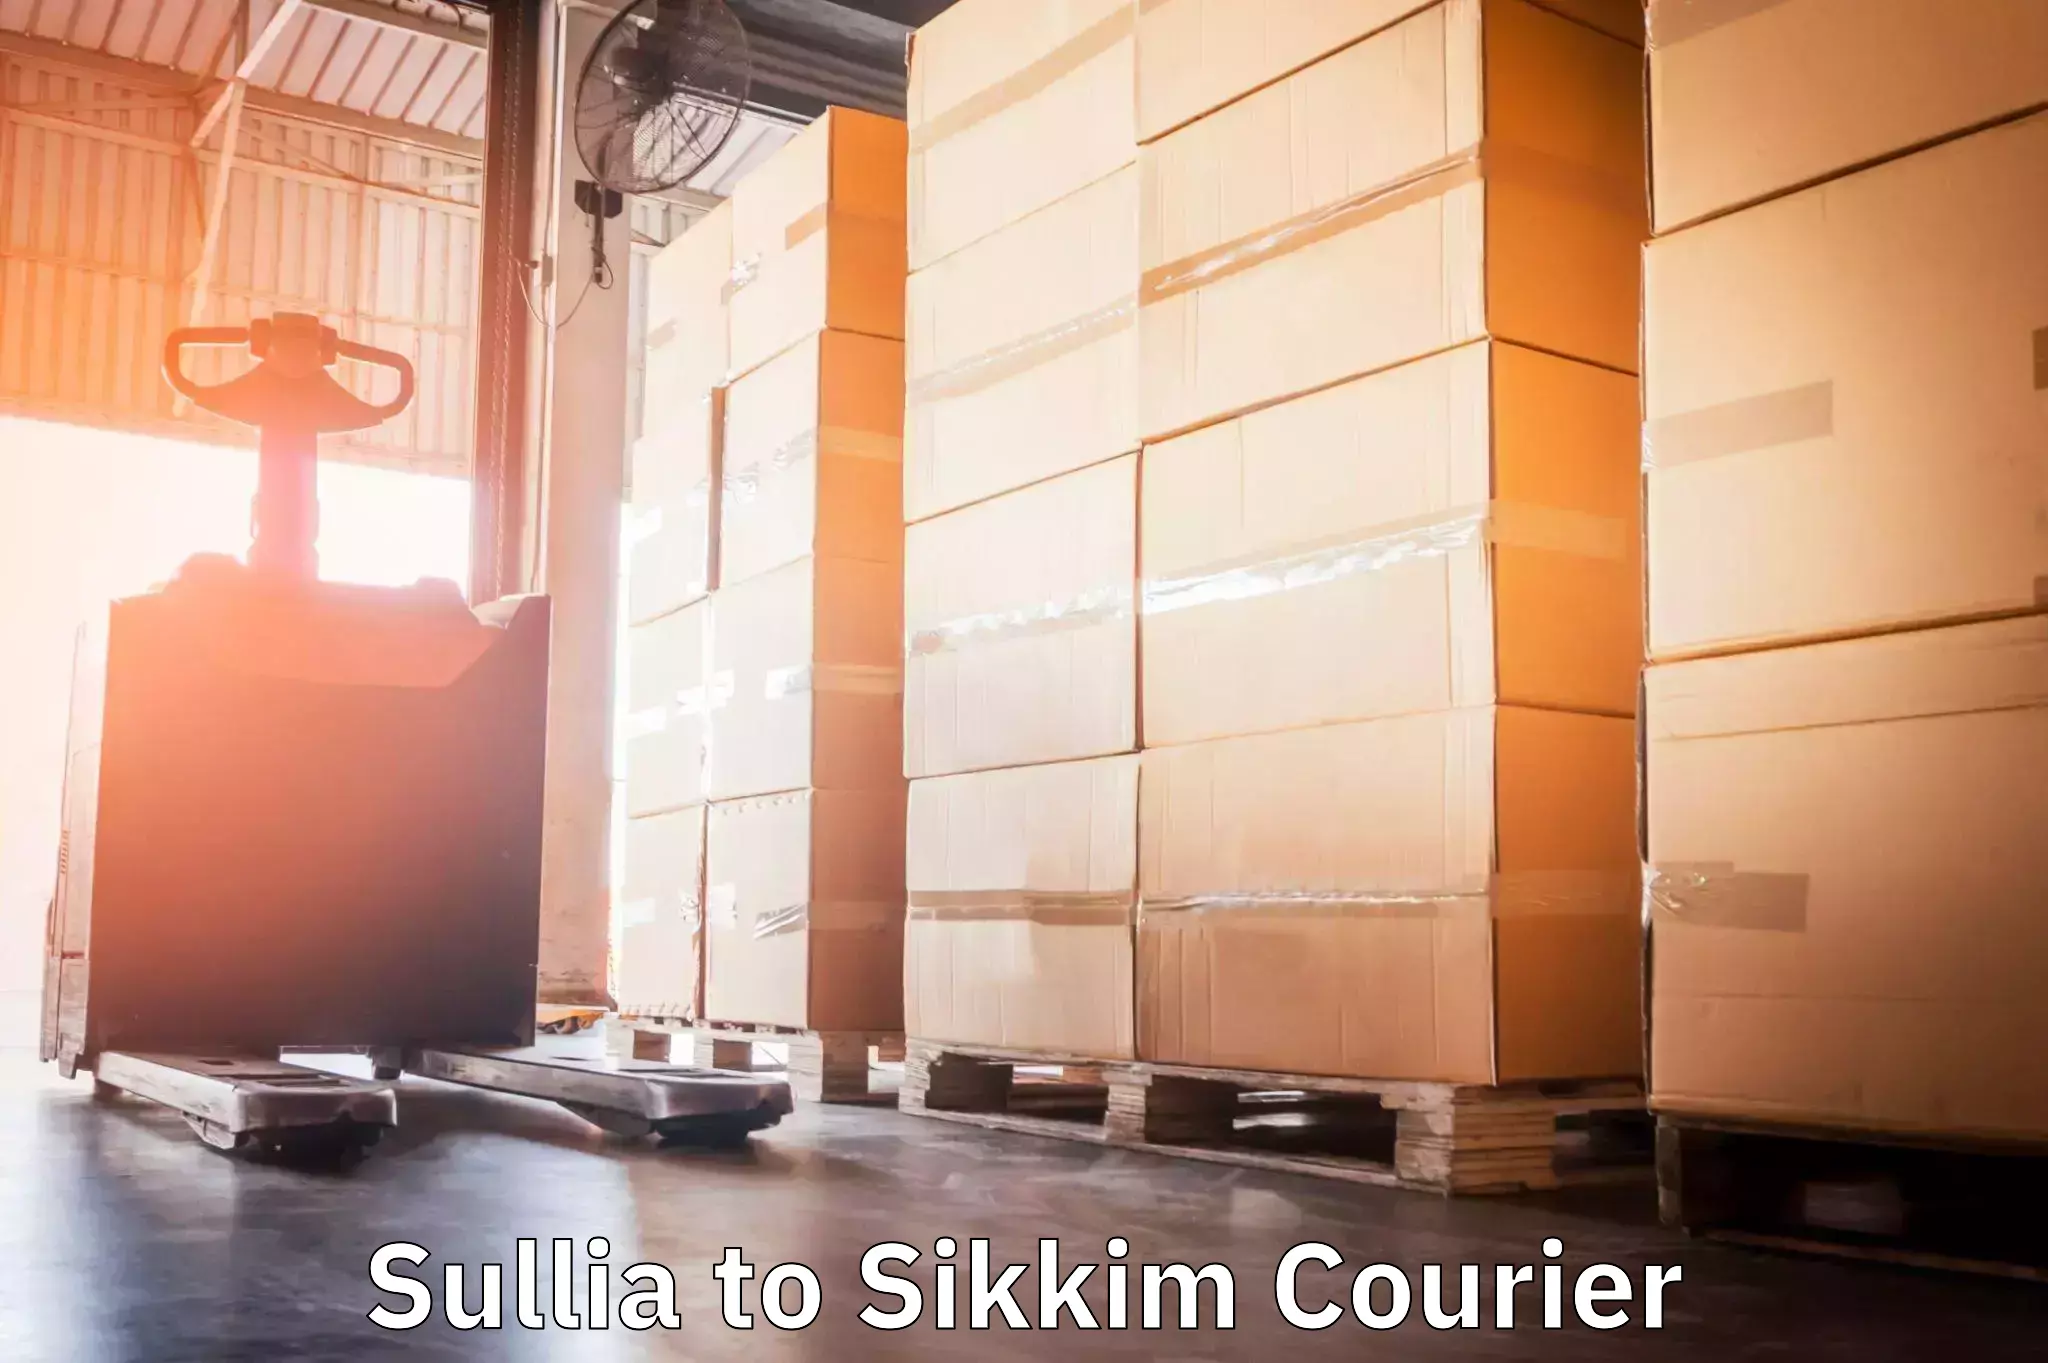 End-to-end delivery Sullia to Sikkim